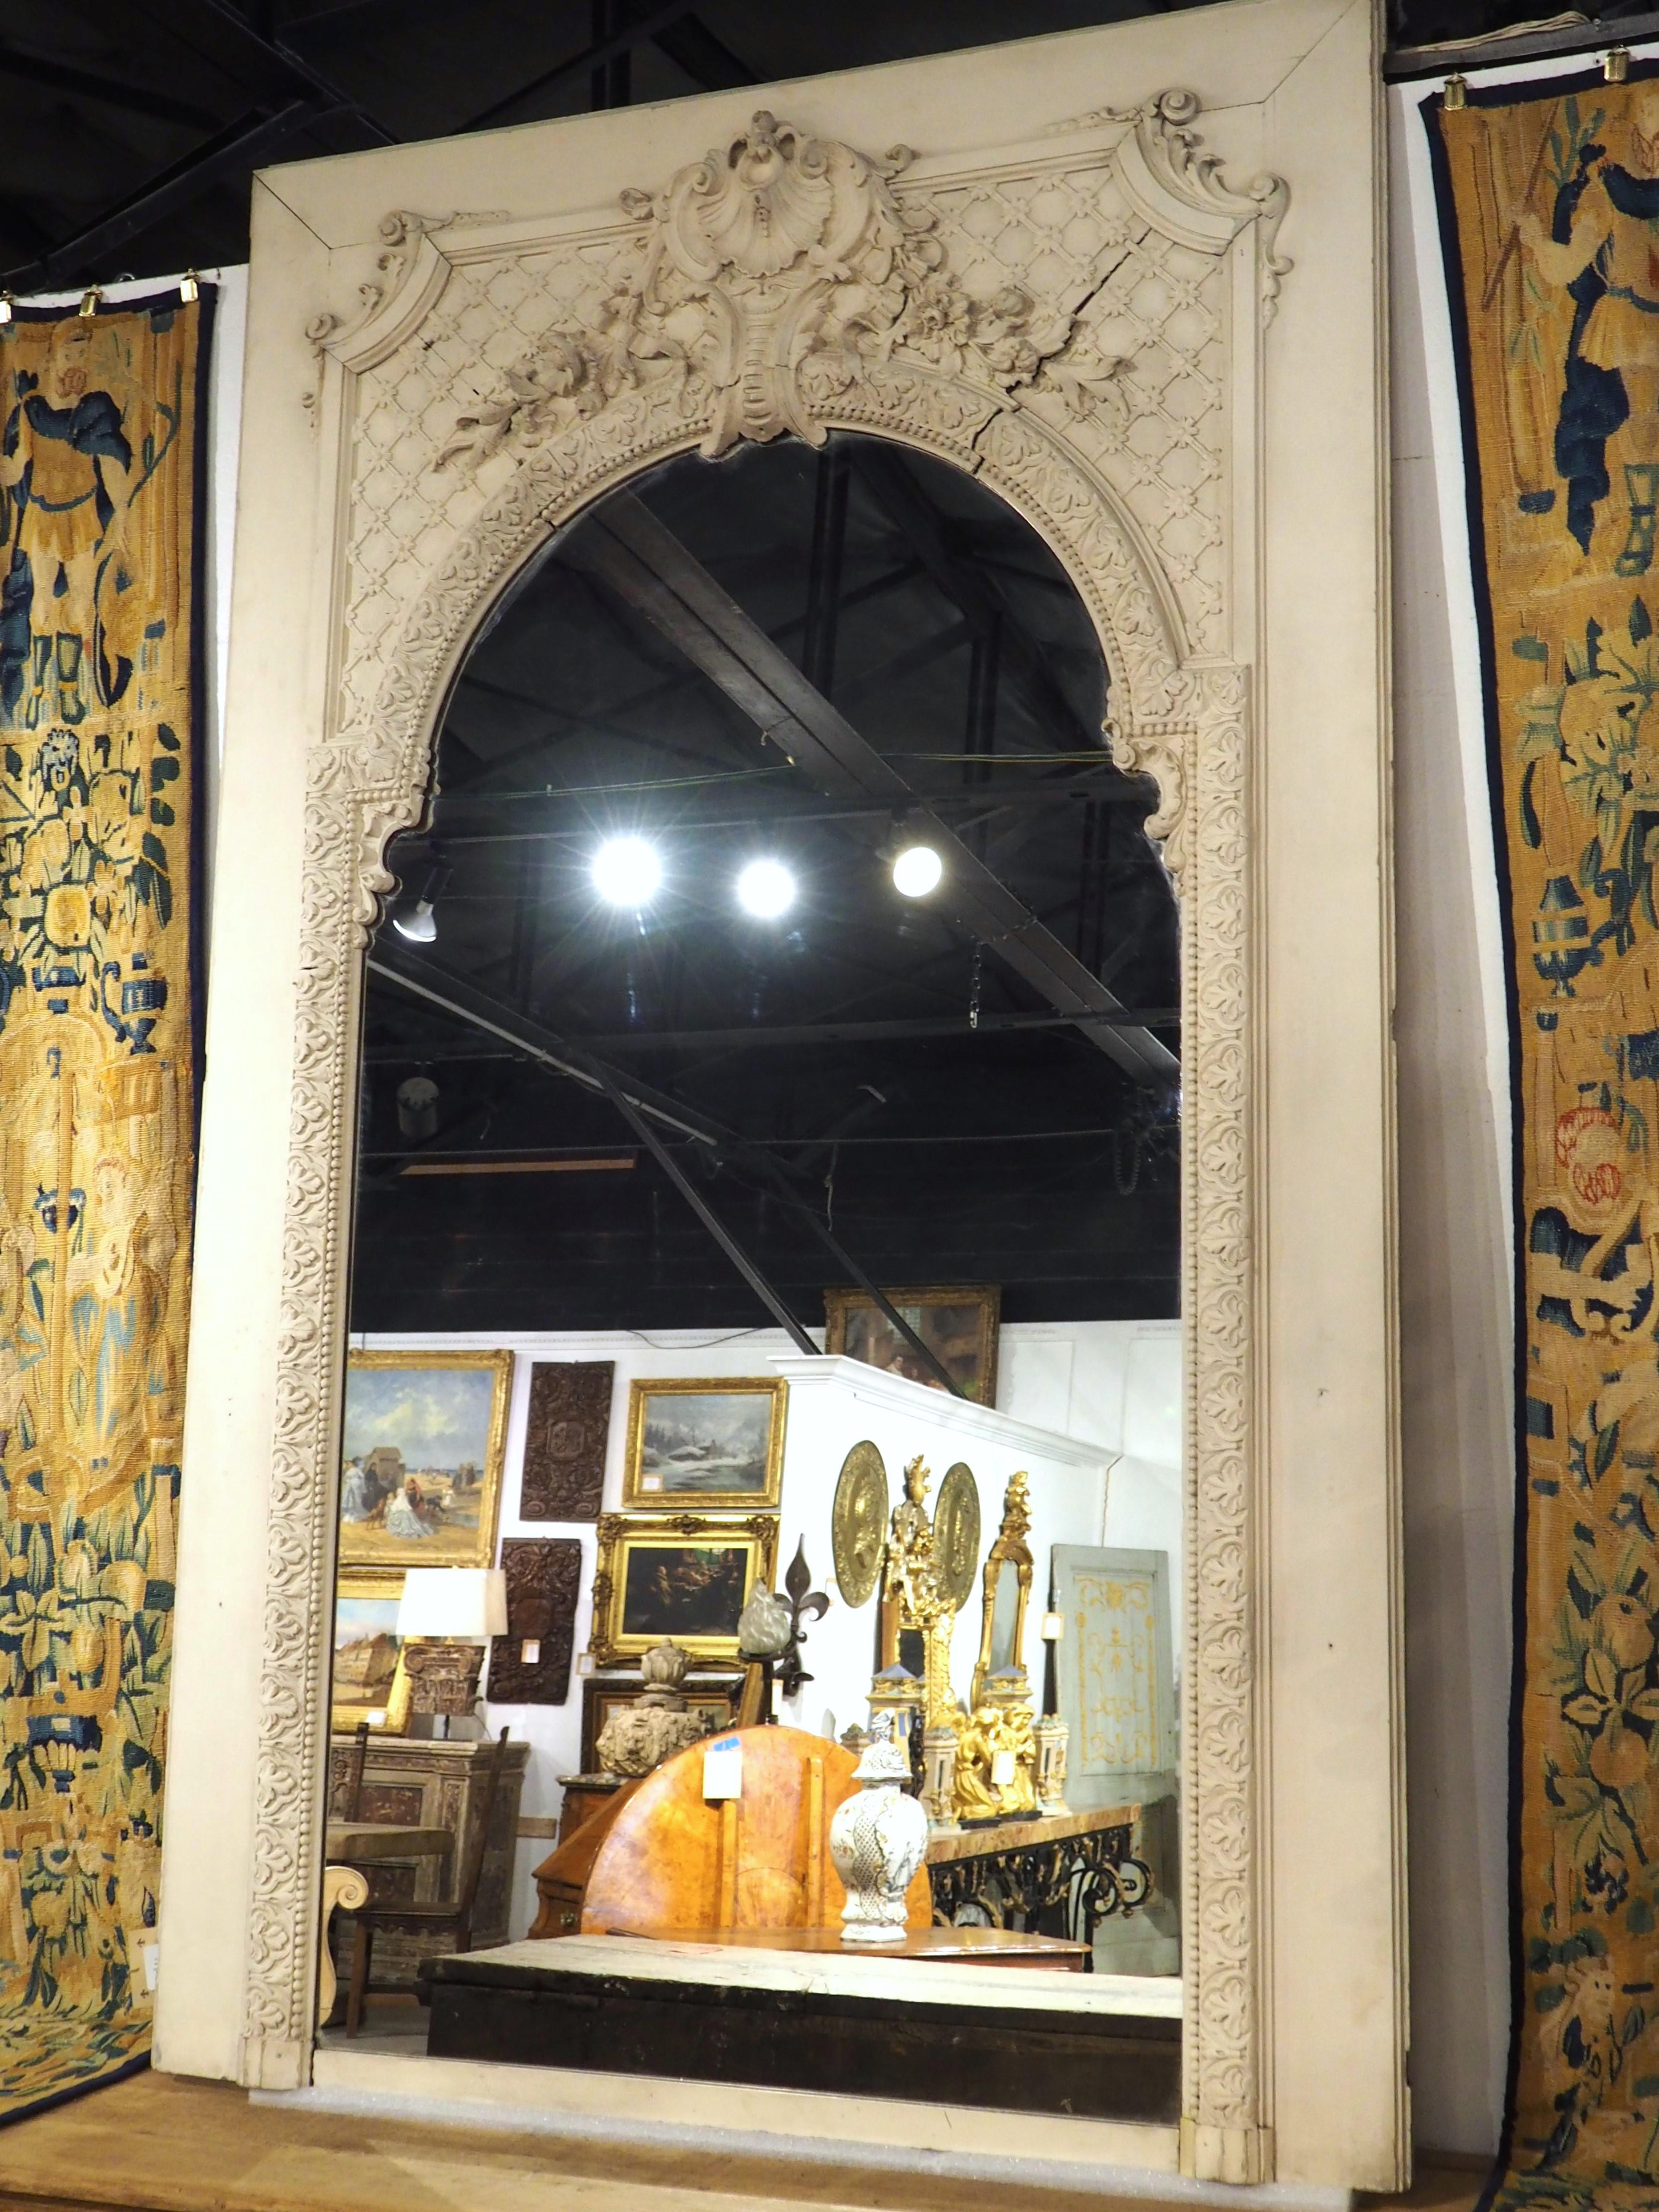 Trumeau boiserie mirrors, such as this painted white offering from France, were designed to be placed on a wall in between two windows. The motifs and color palettes of these mirrors would often match the surrounding paneling. Based on the size